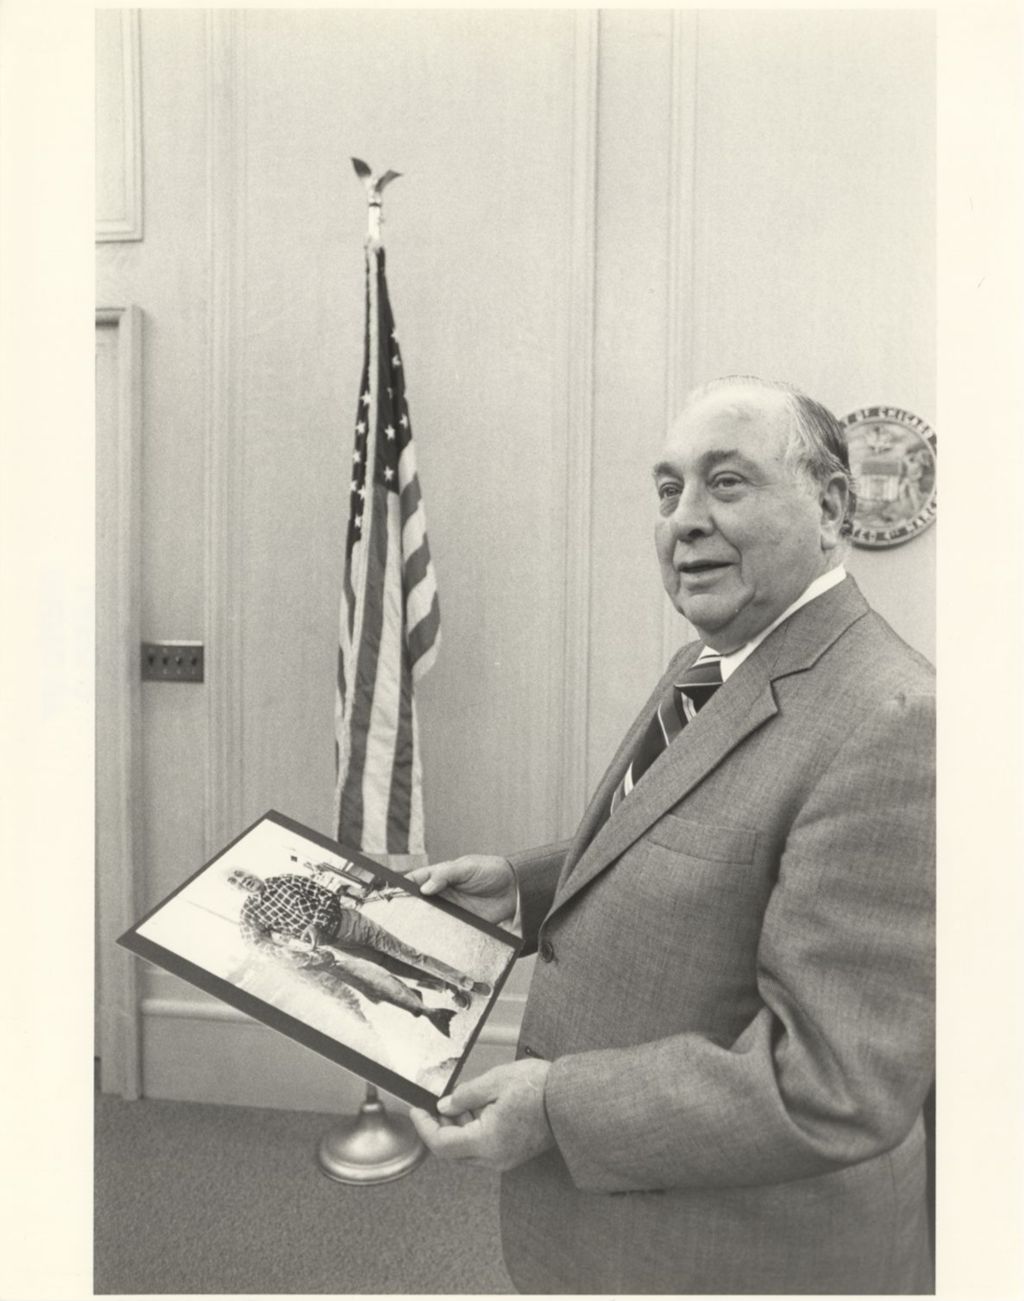 Miniature of Richard J. Daley with a gift photograph